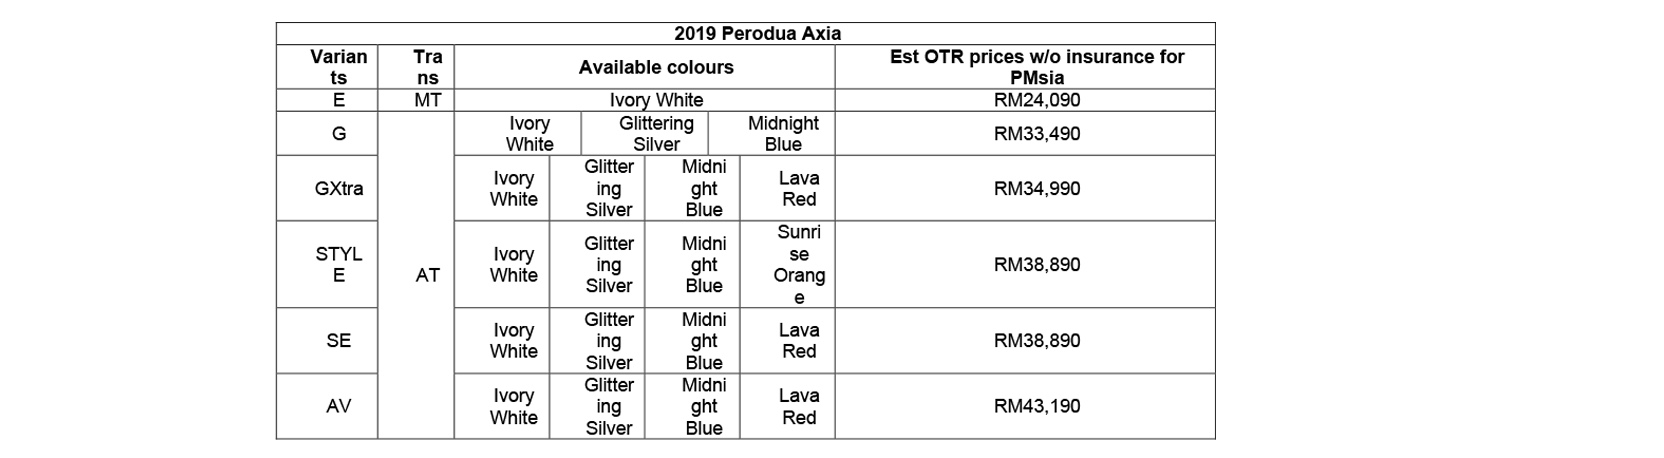 TopGear  2019 Perodua Axia now open for booking [Updated]